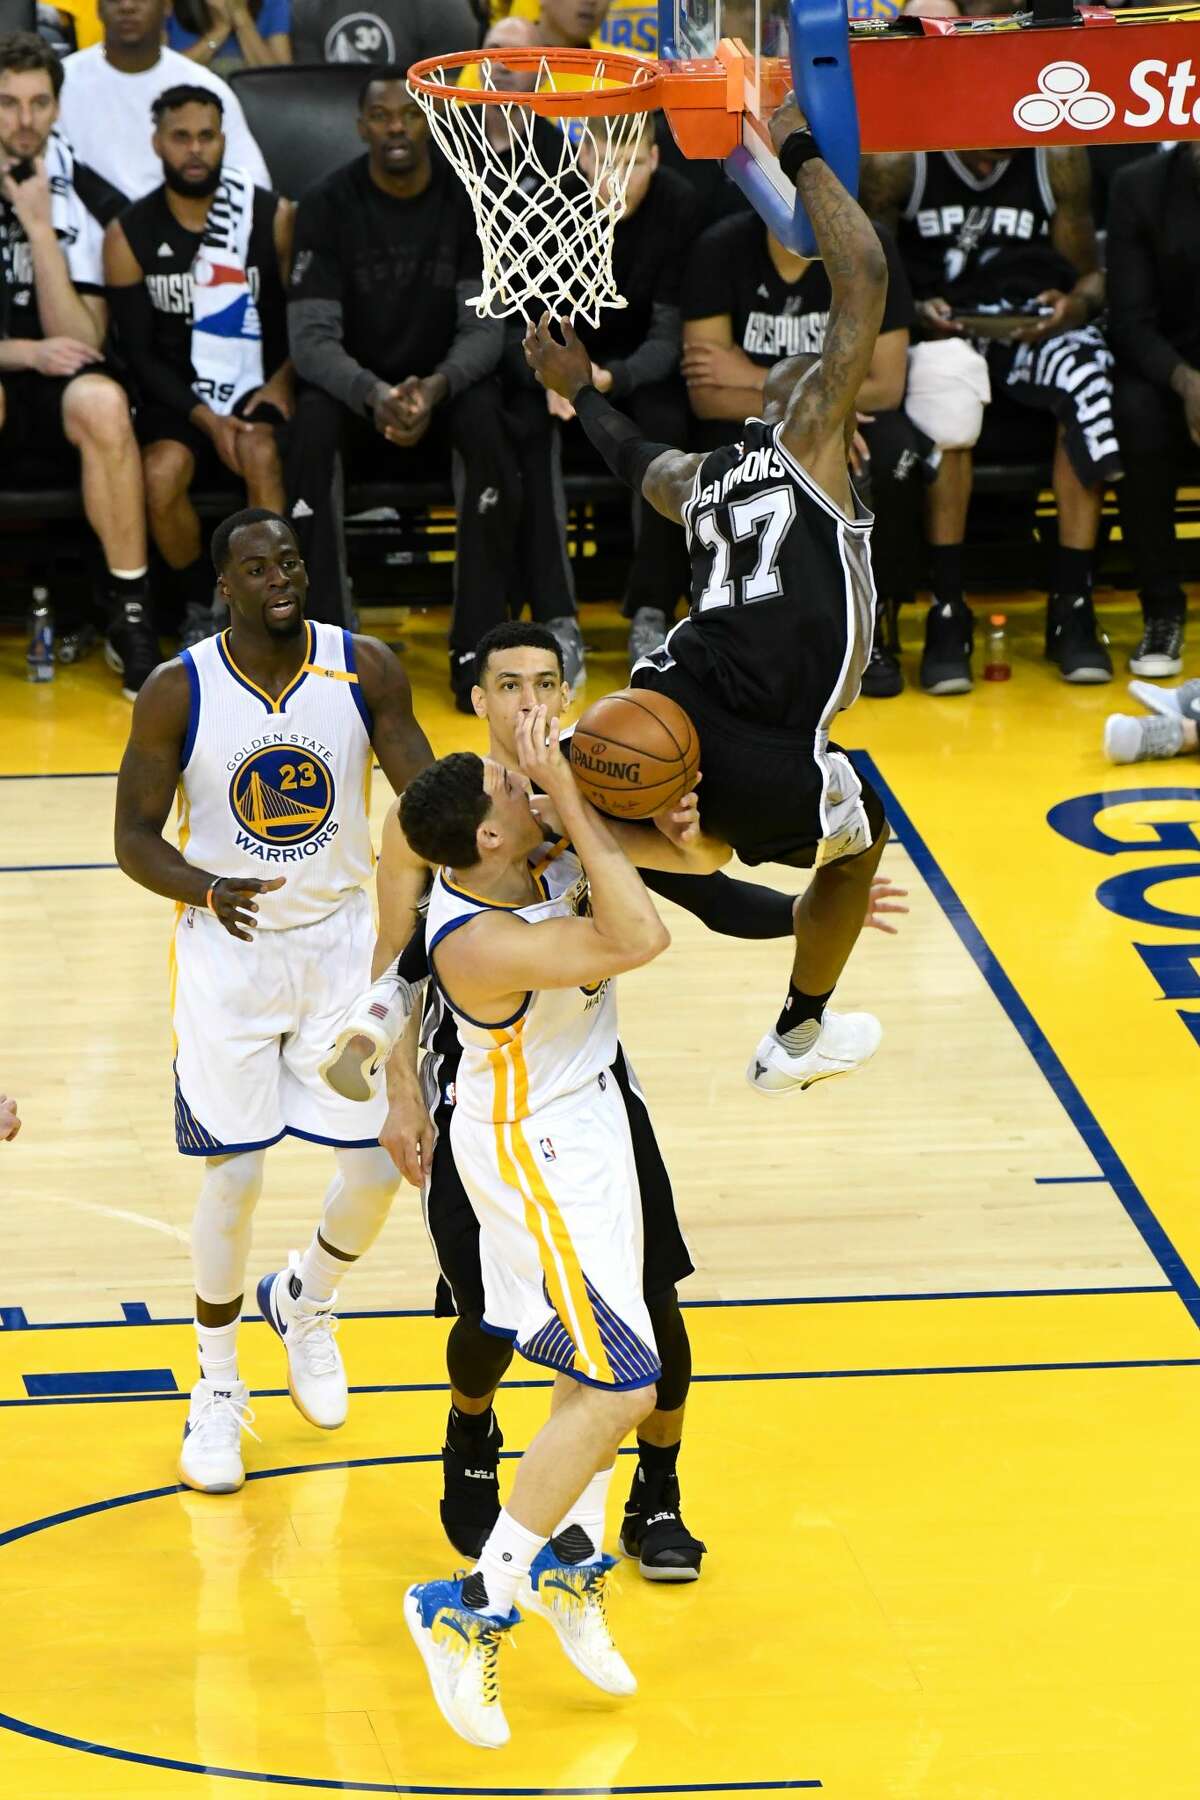 OAKLAND, CA - MAY 14: Klay Thompson #11 of the Golden State Warriors is fouled by Jonathon Simmons #17 of the San Antonio Spurs during Game One of the NBA Western Conference Finals at ORACLE Arena on May 14, 2017 in Oakland, California. NOTE TO USER: User expressly acknowledges and agrees that, by downloading and or using this photograph, User is consenting to the terms and conditions of the Getty Images License Agreement. (Photo by Thearon W. Henderson/Getty Images)